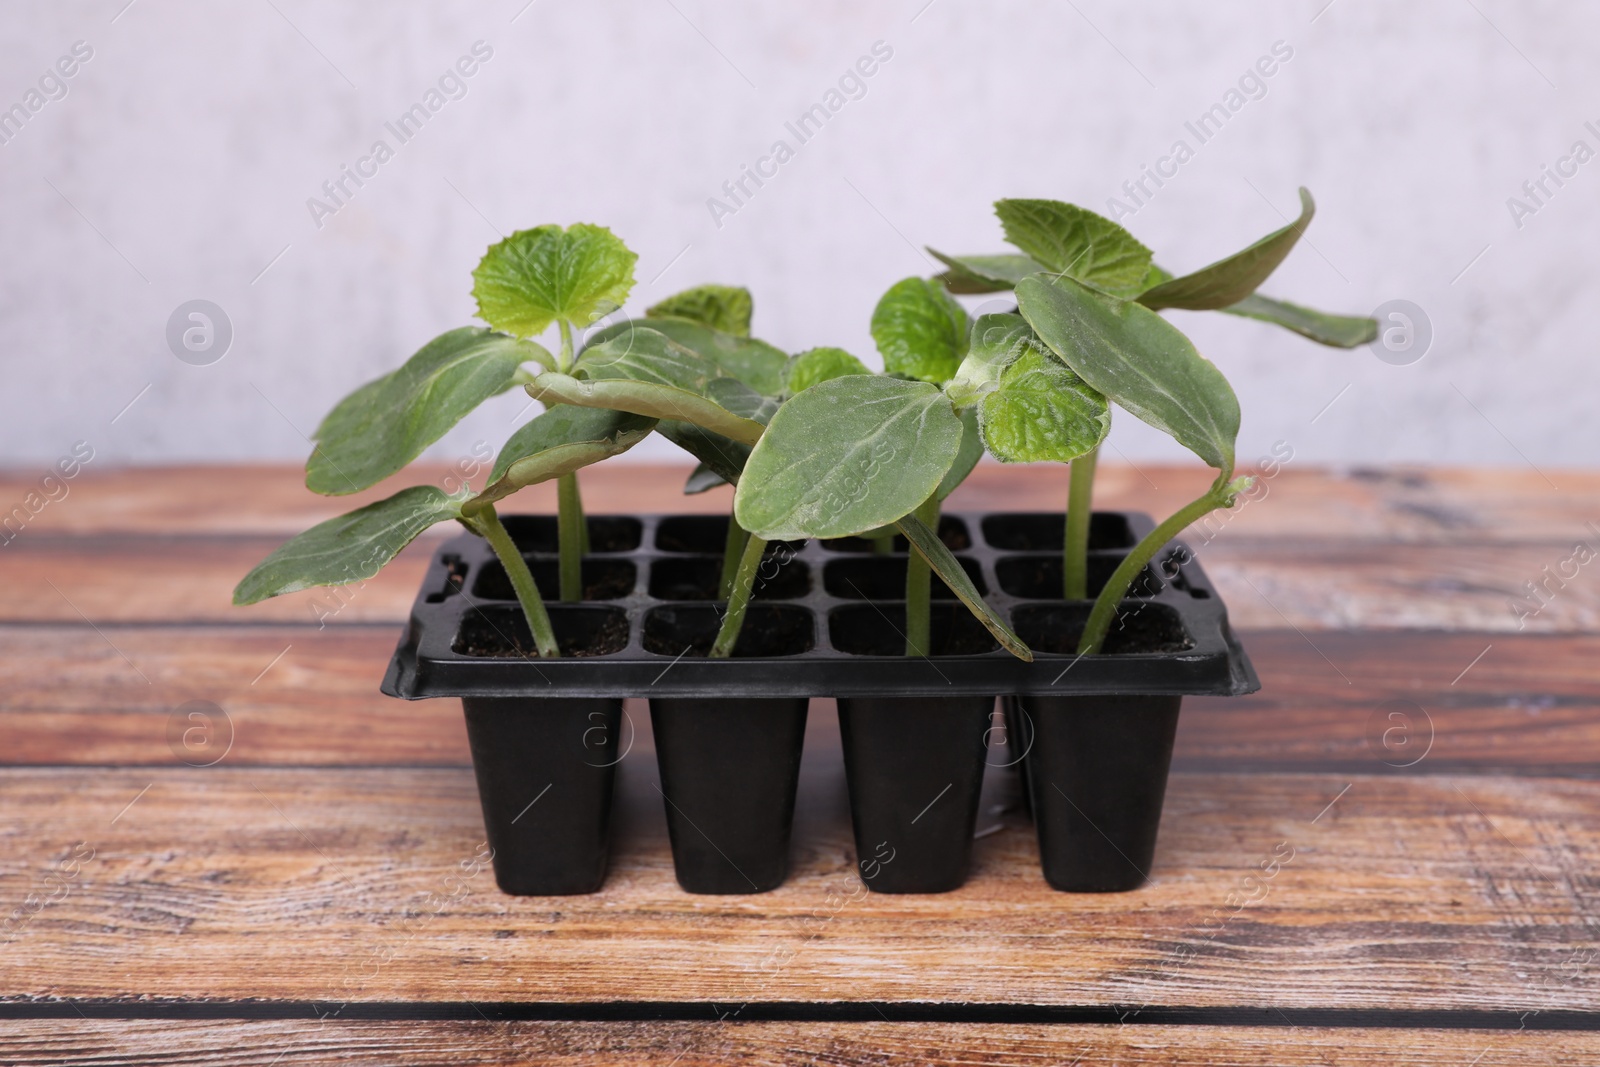 Photo of Seedlings growing in plastic container with soil on wooden table. Gardening season